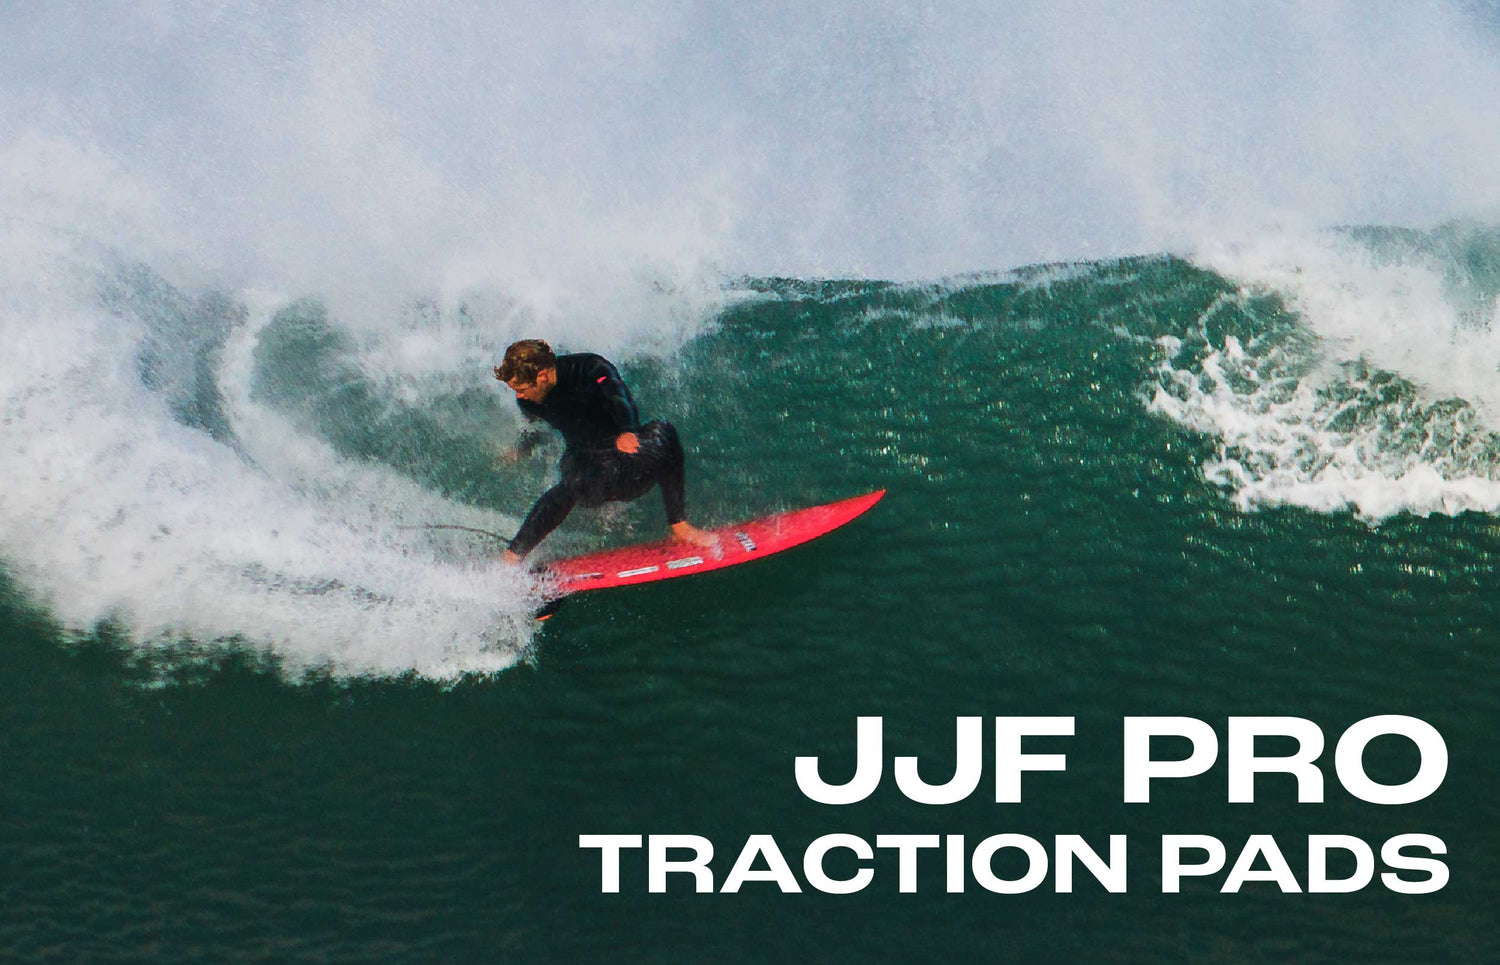 JJF Pro Grom Traction Pads